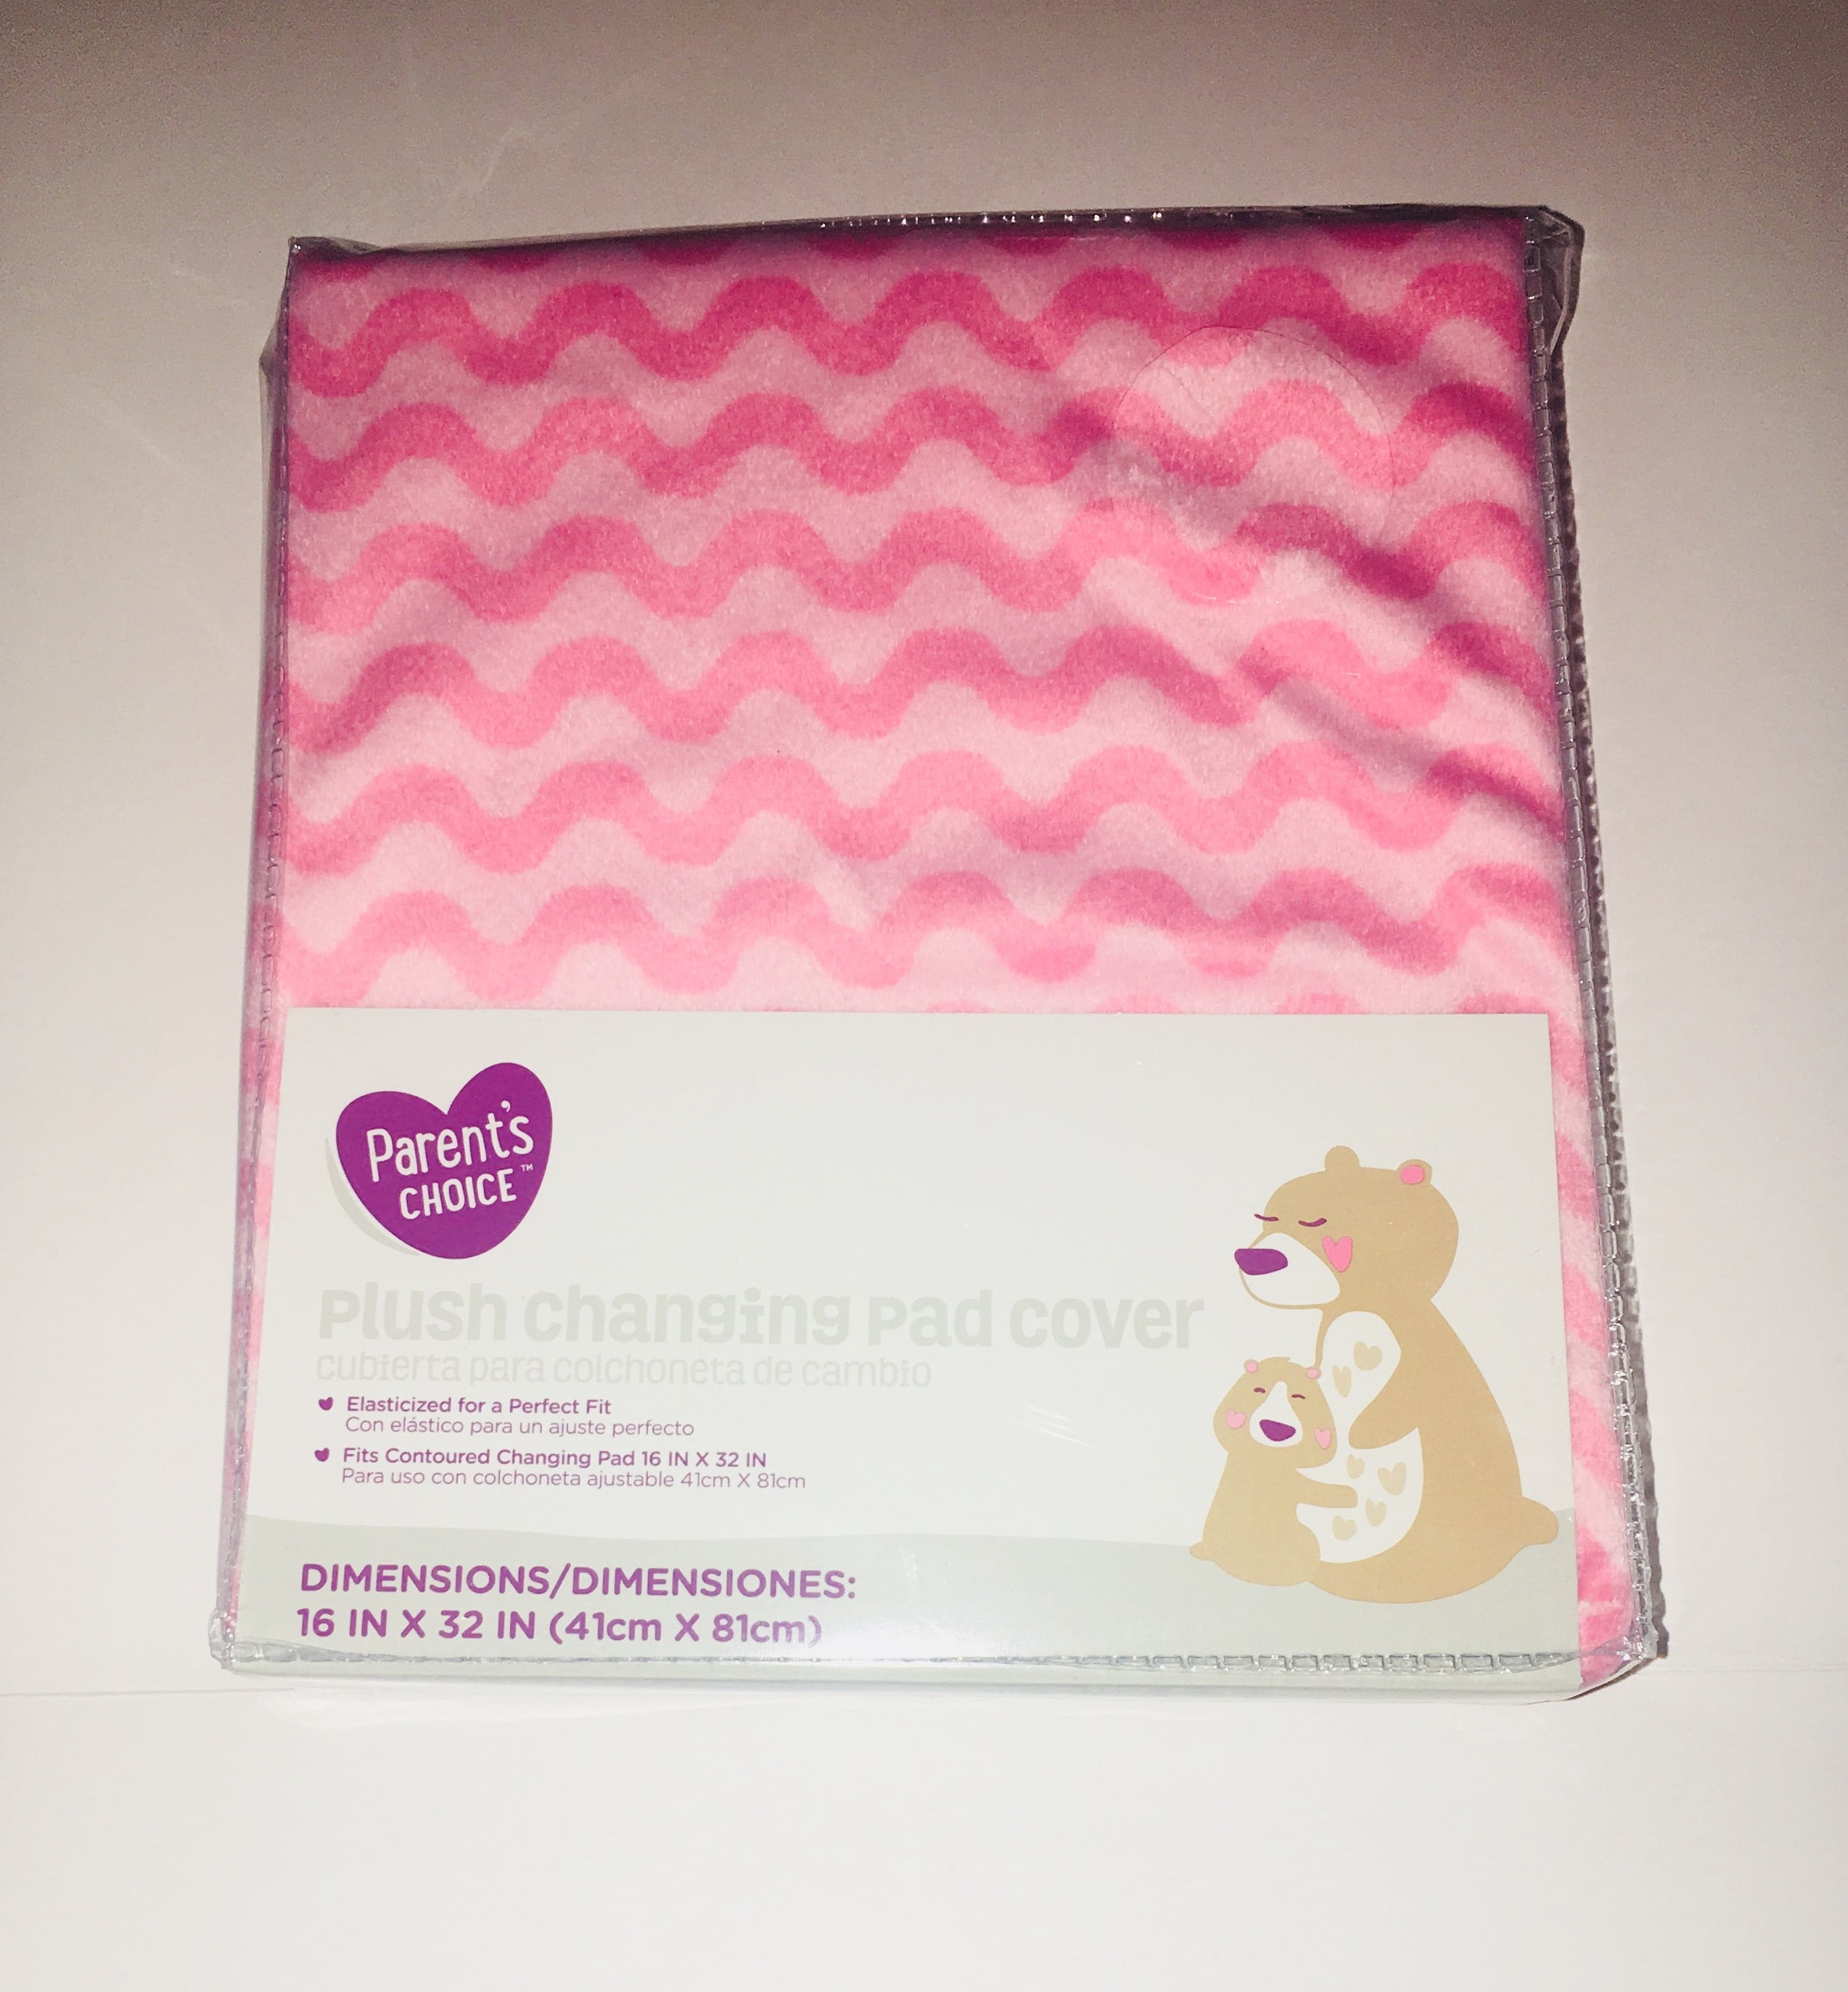 Baby Products Online - Buffy diaper pad cover, love pink - Kideno